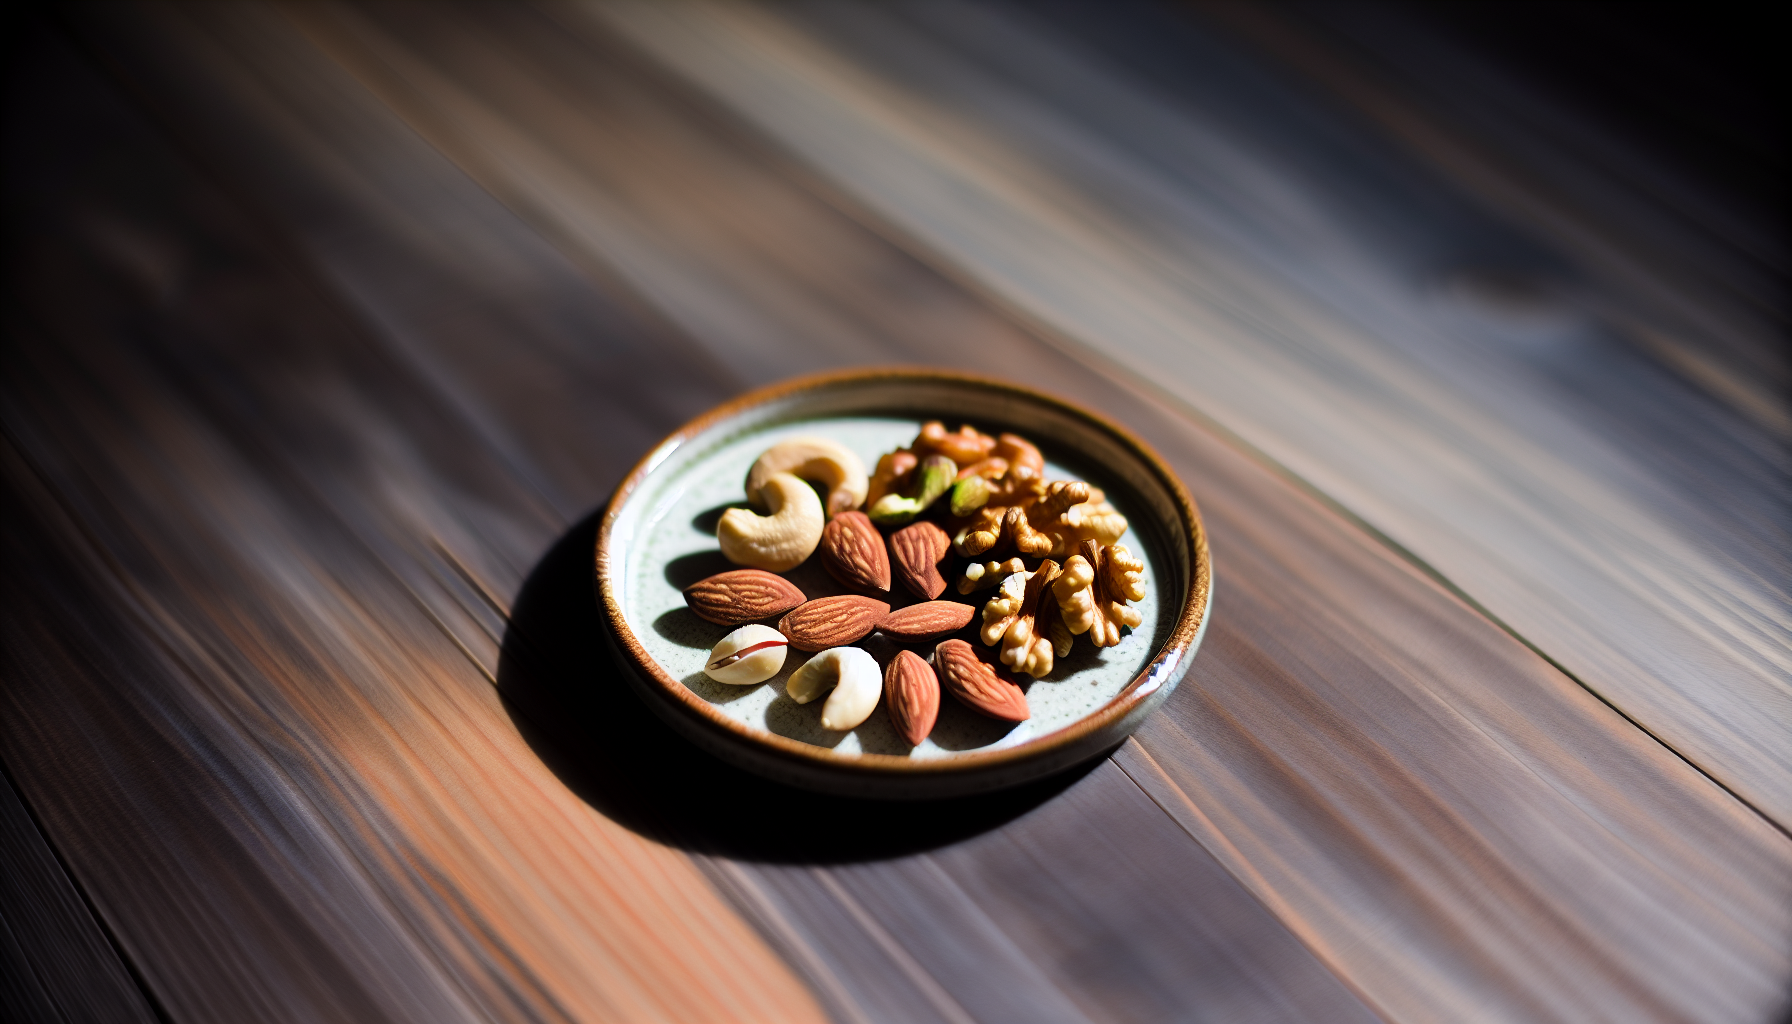 Portion control with a small handful of mixed nuts